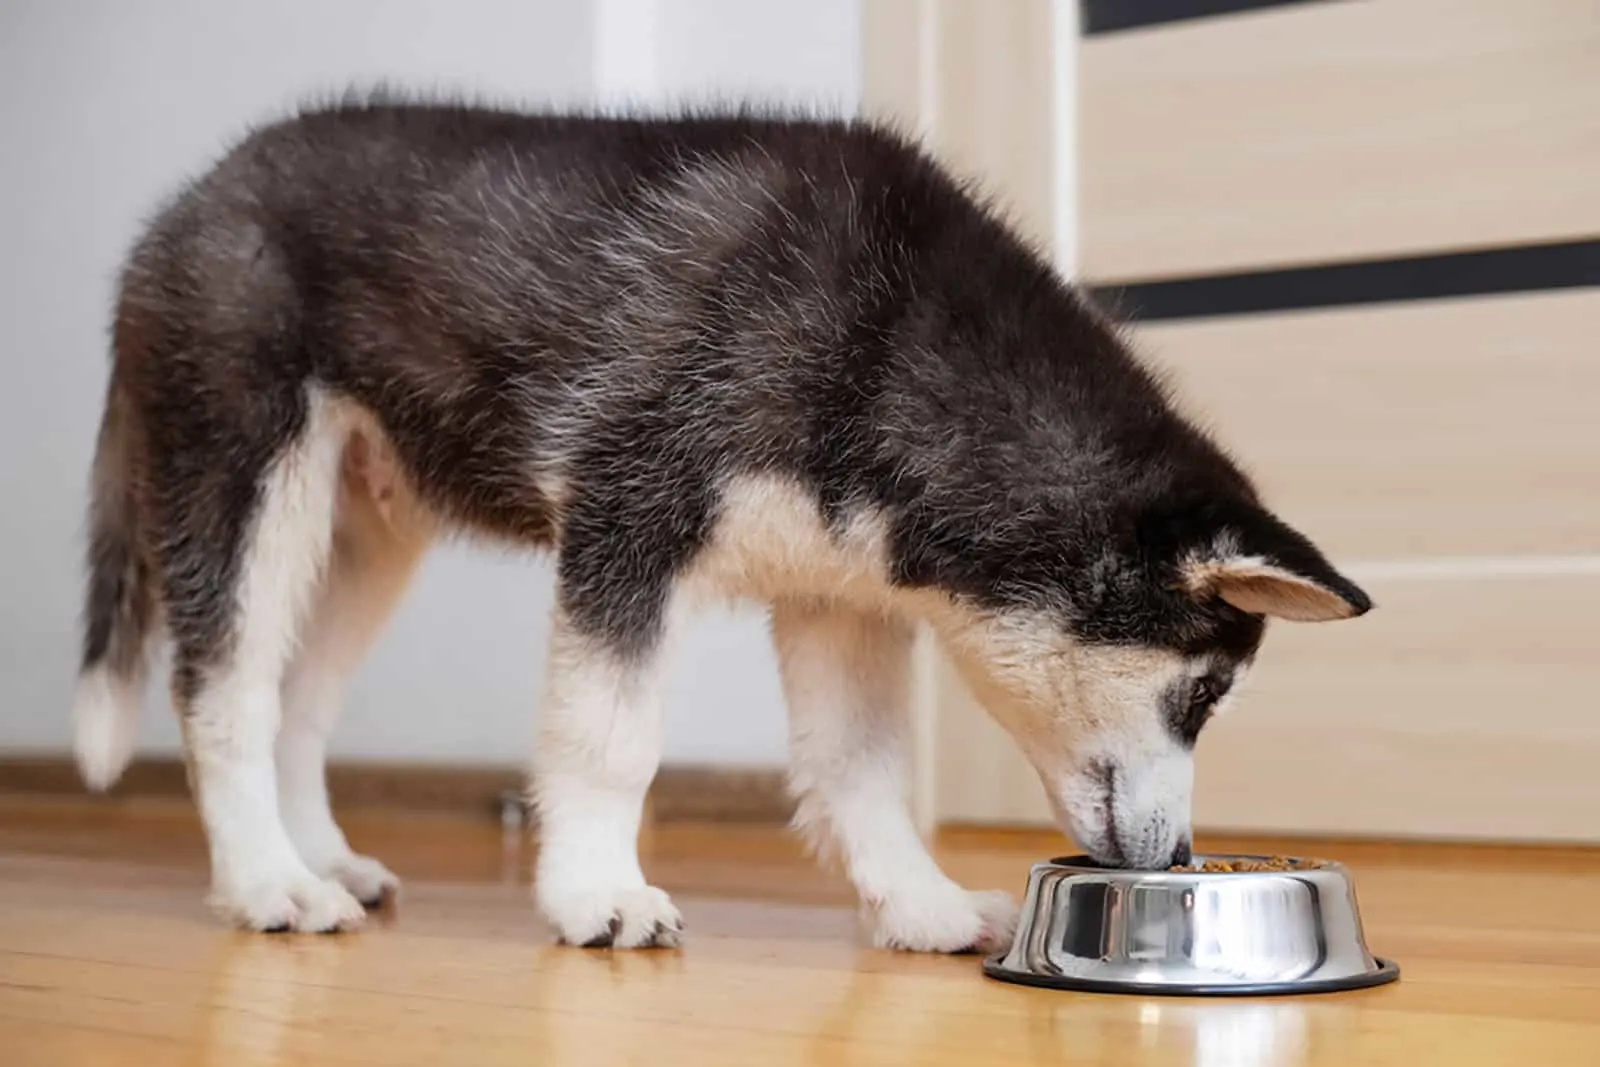 husky puppy eating from a bowl at home